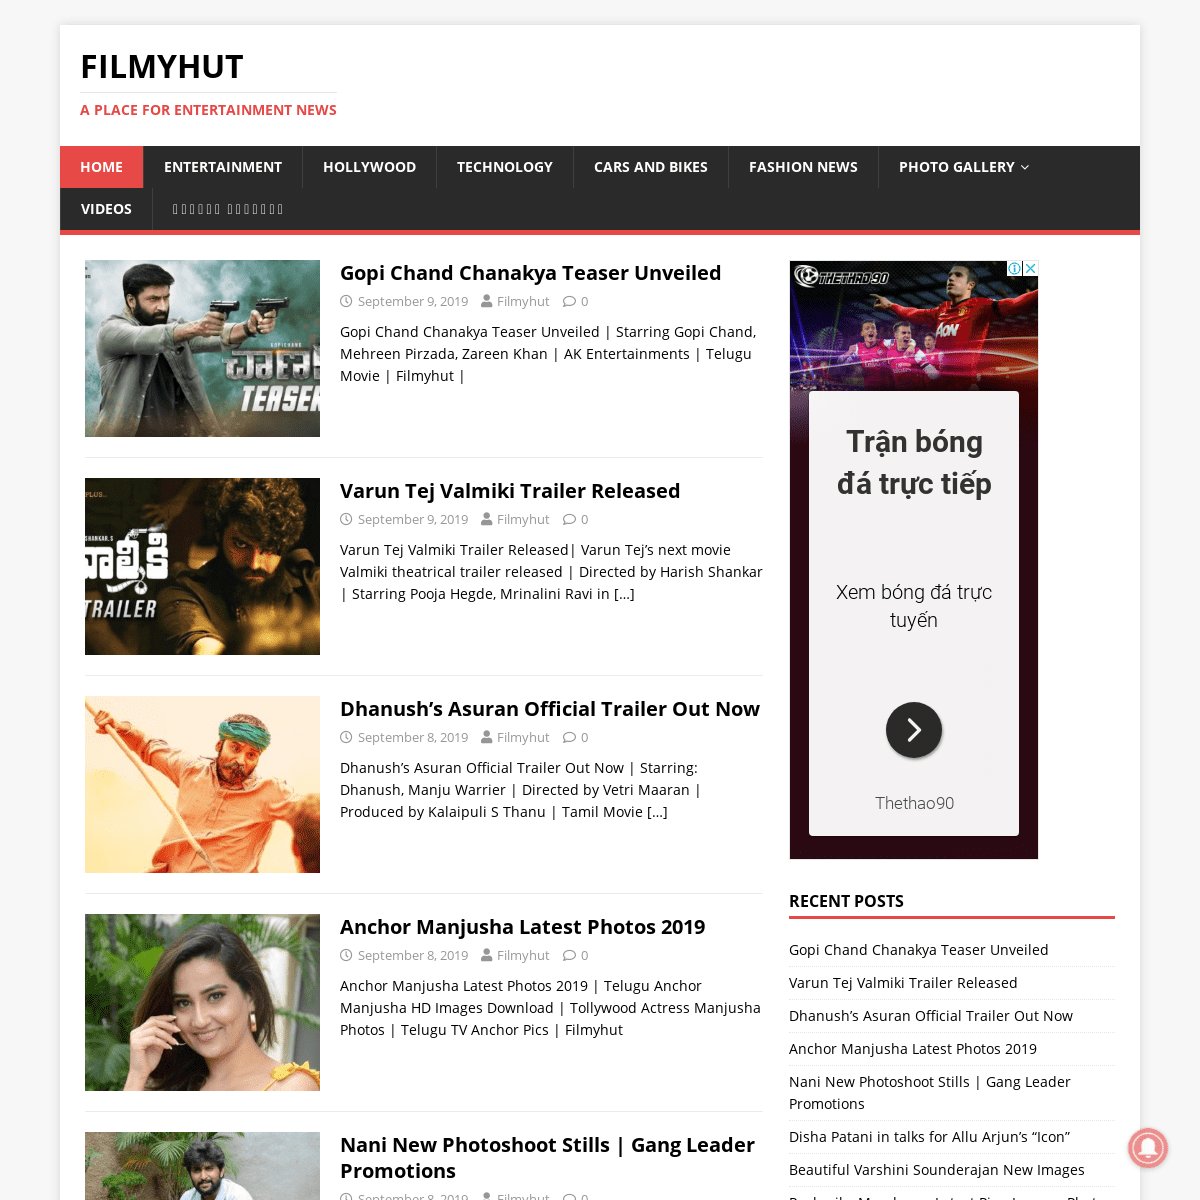 Filmyhut - A Place For Entertainment News